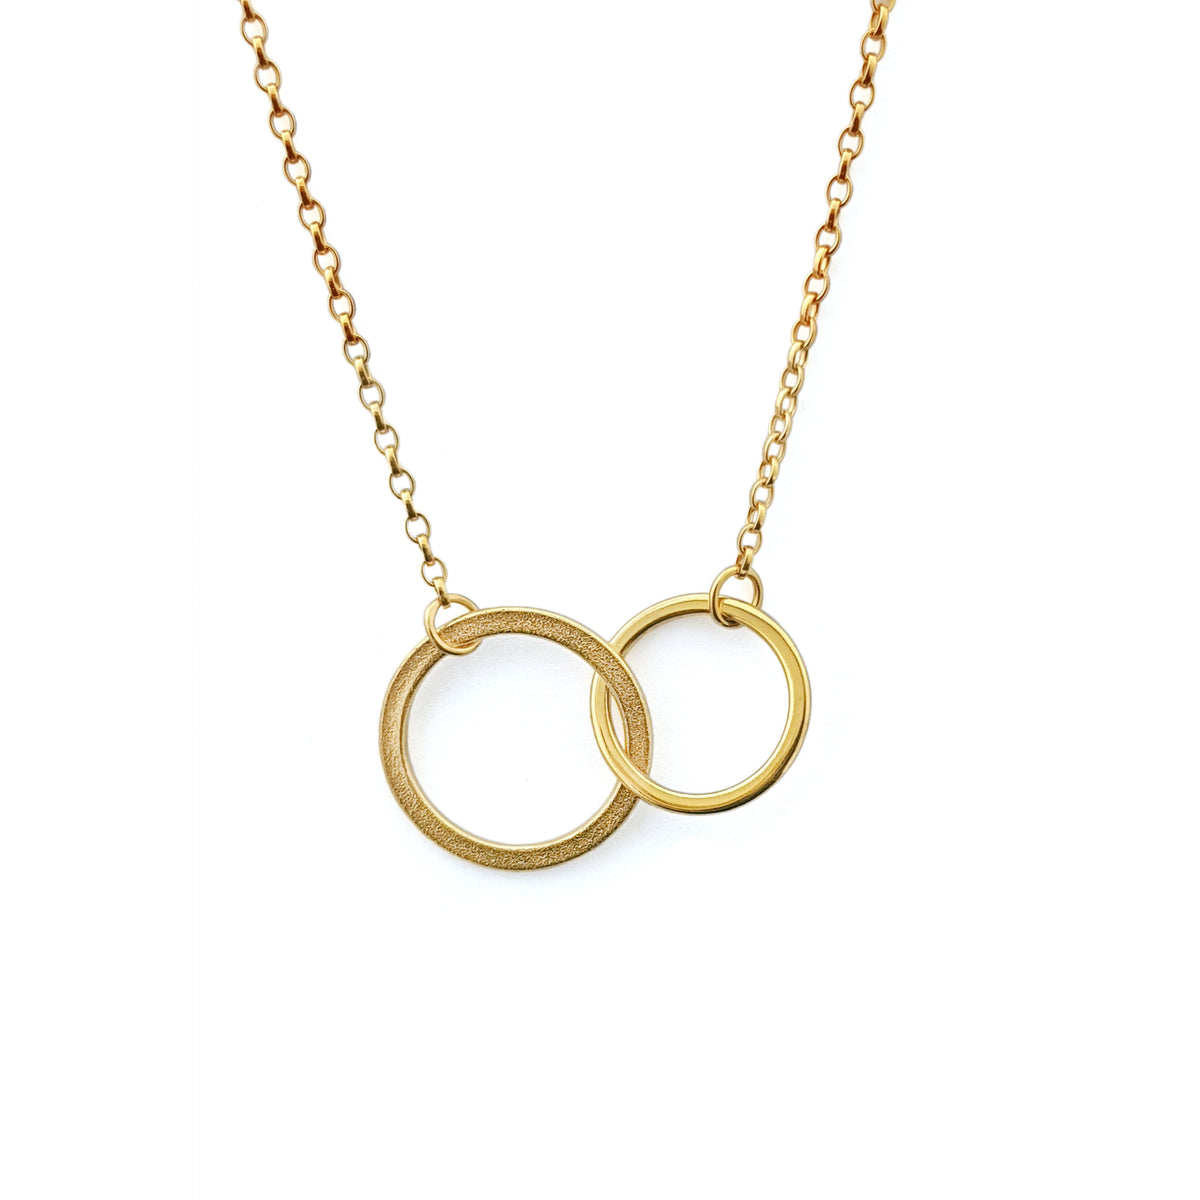 Interlinked Ellipse Necklace - Boutee